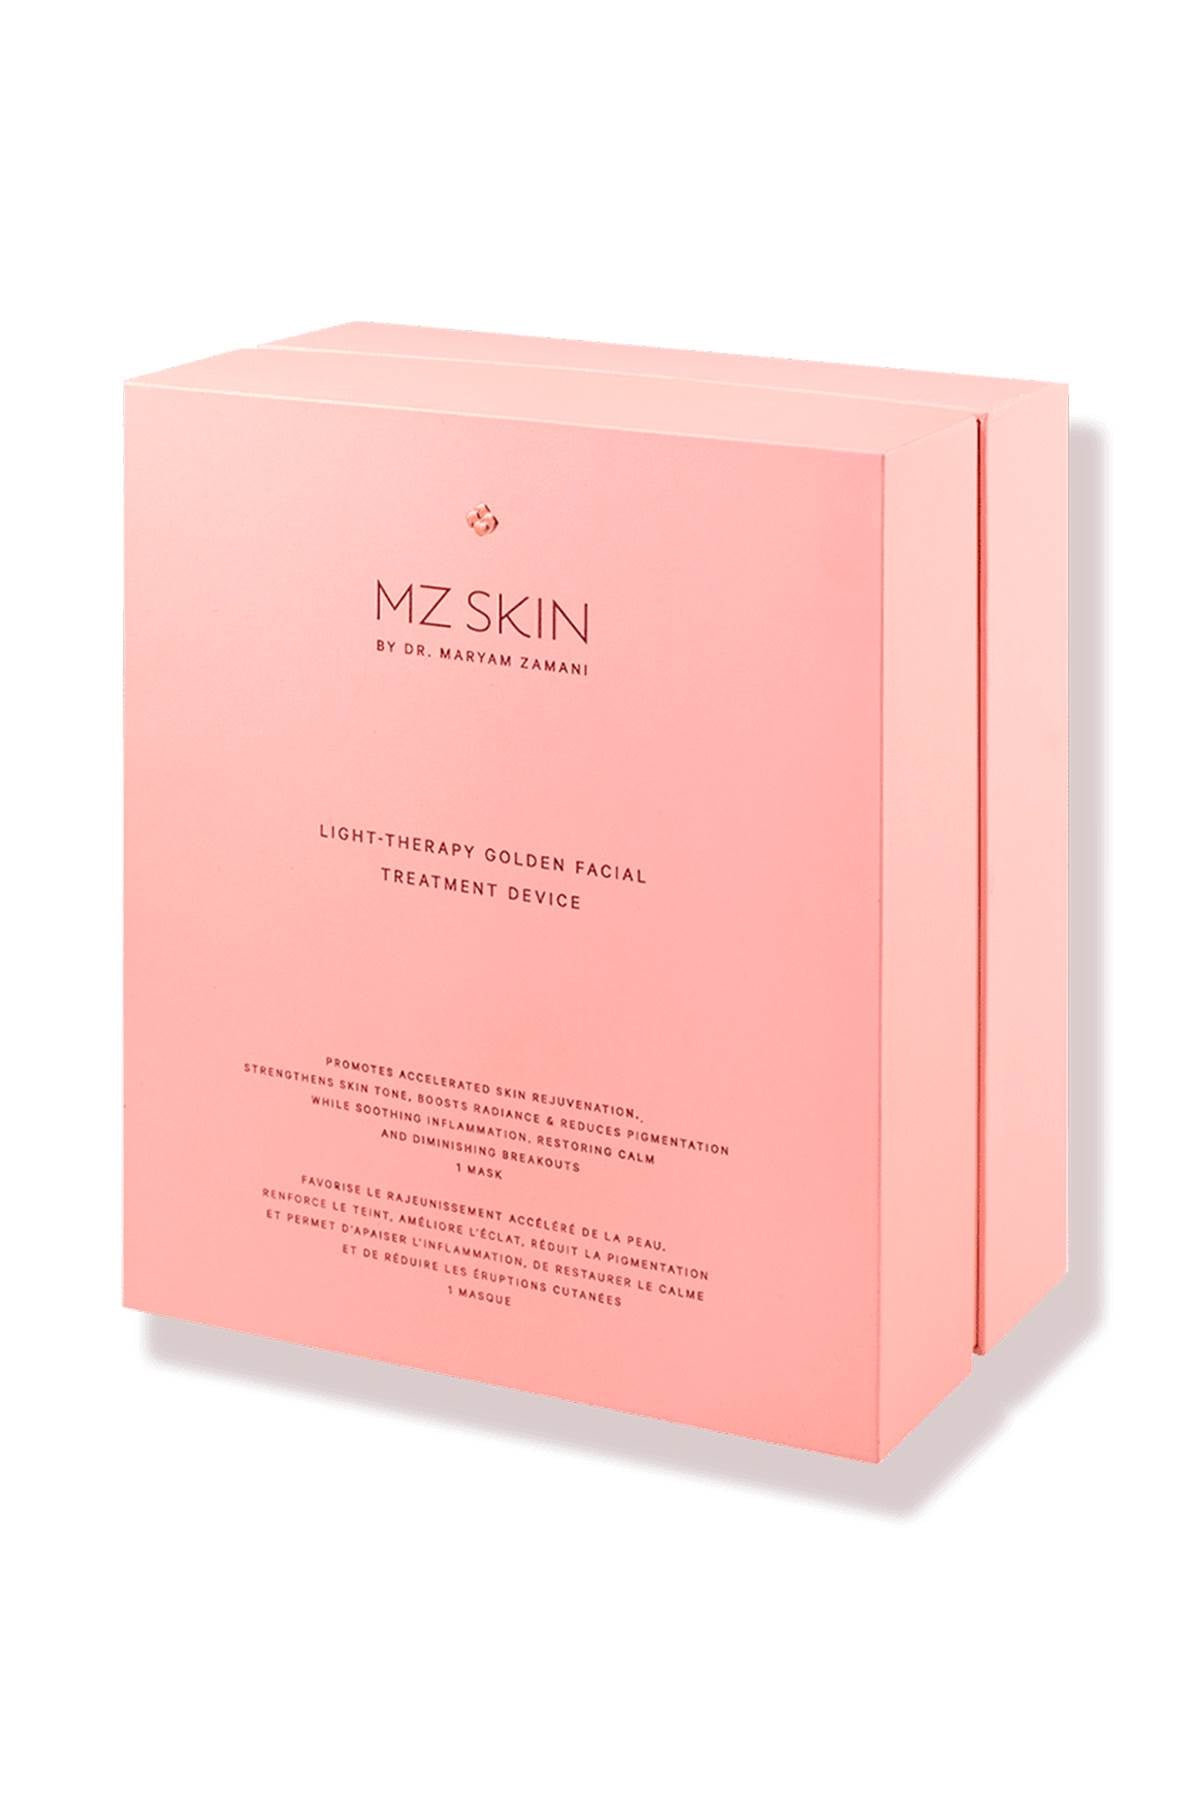 Mz skin light-therapy golden  facial treatment device-1